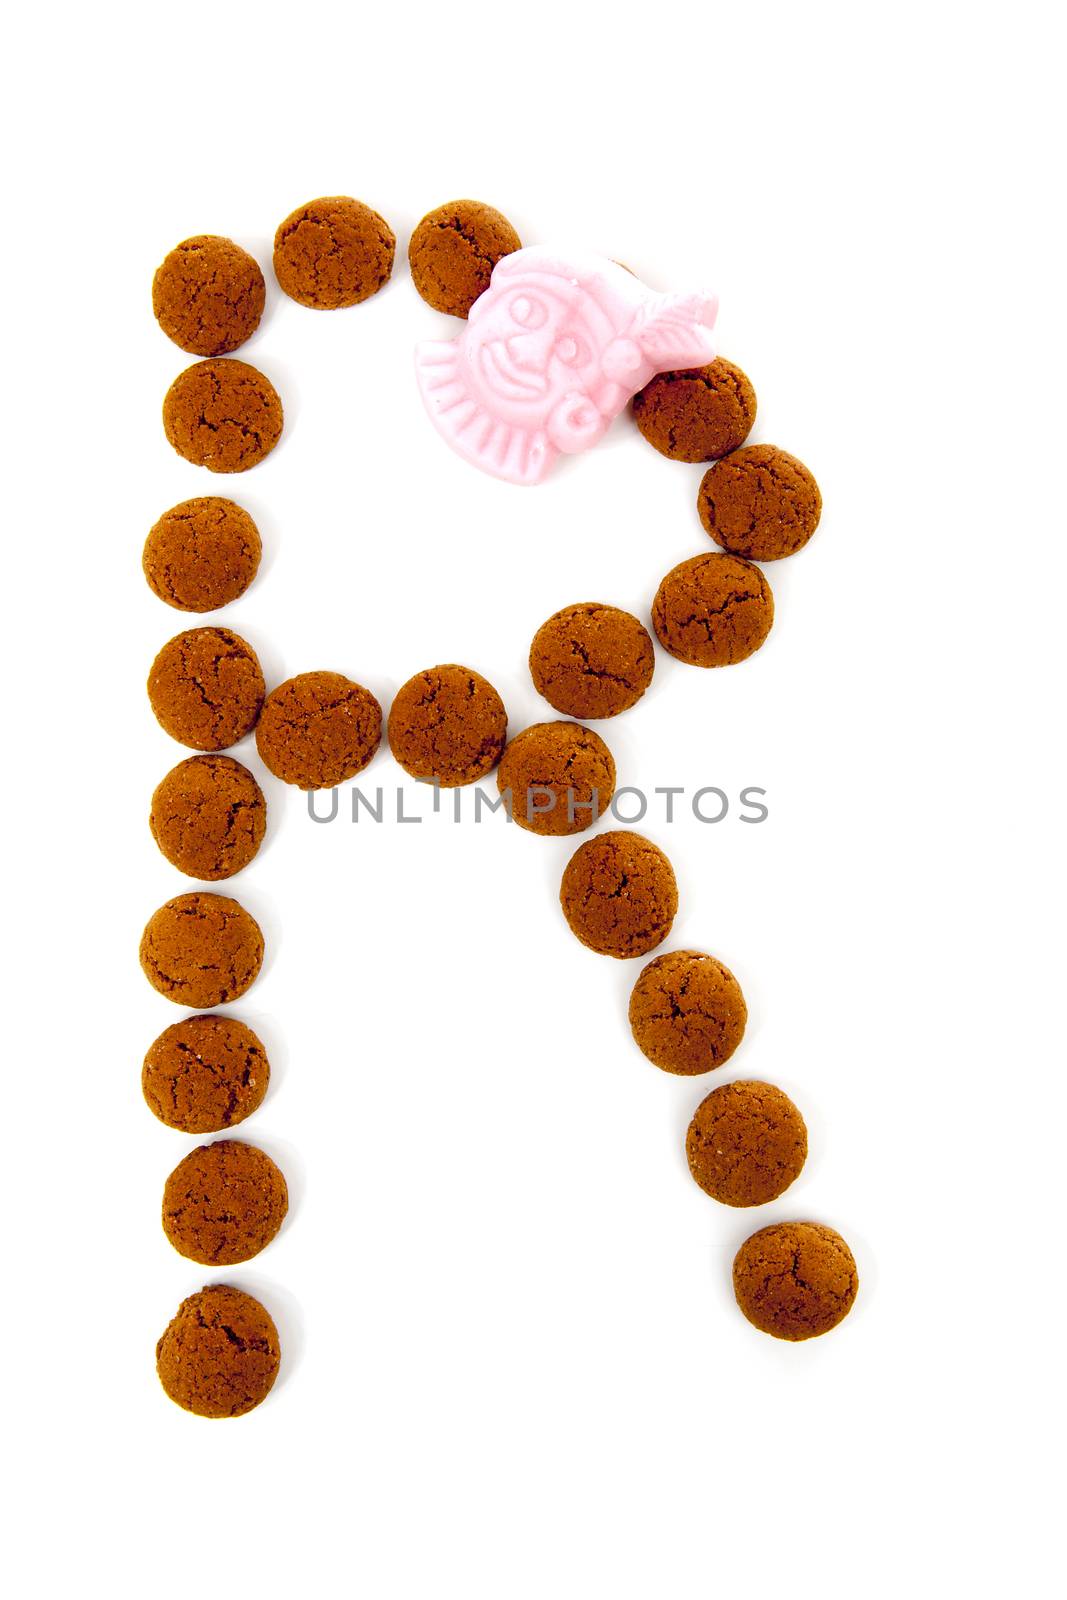 Ginger nuts, pepernoten, in the shape of letter R isolated on white background. Typical Dutch candy for Sinterklaas event in december